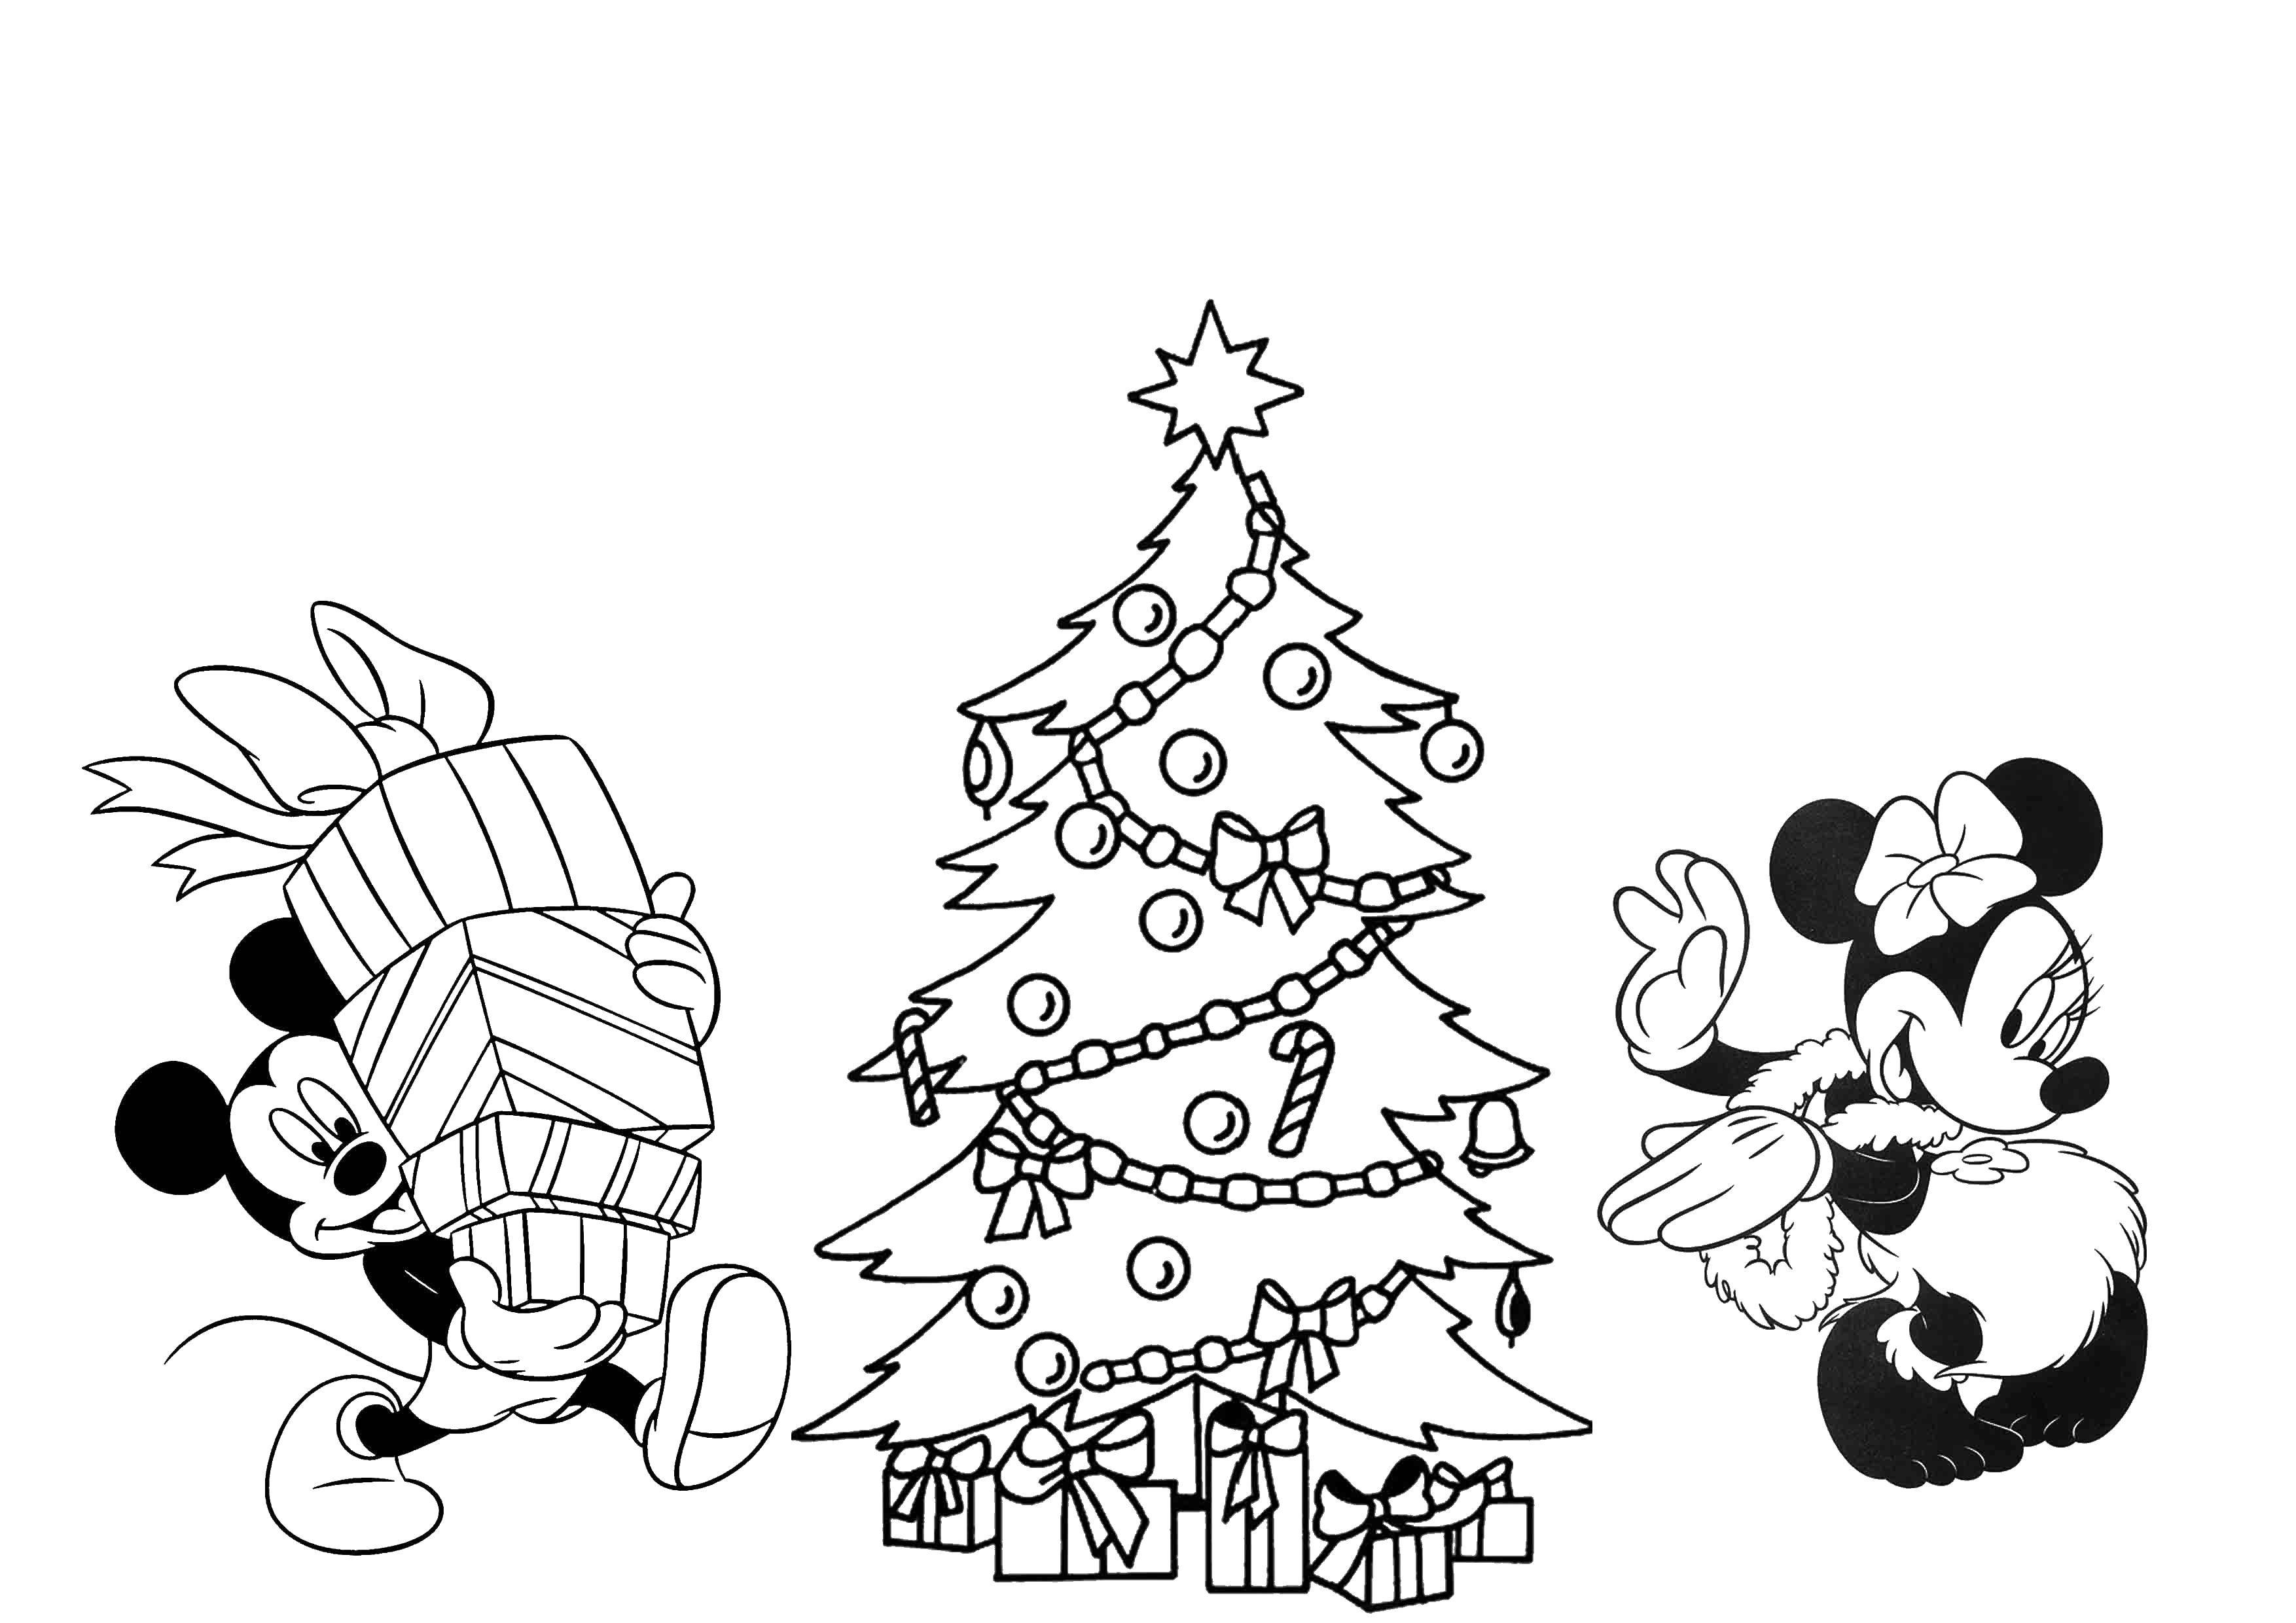 Coloring Minnie mouse and Mickey mouse new year. Category Disney coloring pages. Tags:  Disney, Mickey Mouse, Minnie Mouse.